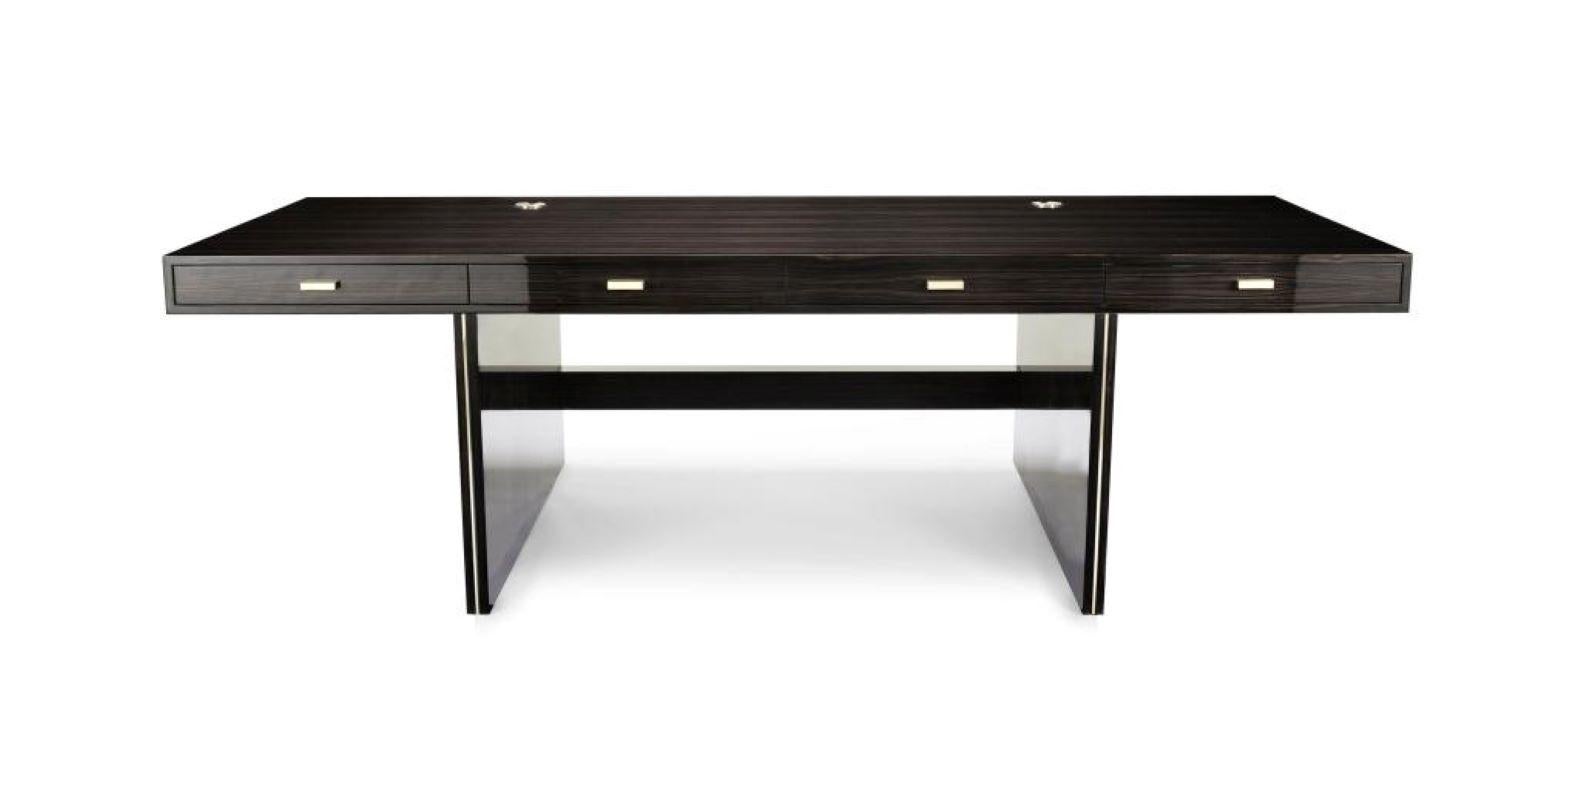 The very definition of sleek sophistication, the Mortimer is a desk for those who subscribe to the ‘less is more’ aesthetic. With its impressively-streamlined Silhouette, this desk promises to redefine your study, turning it from a tired and